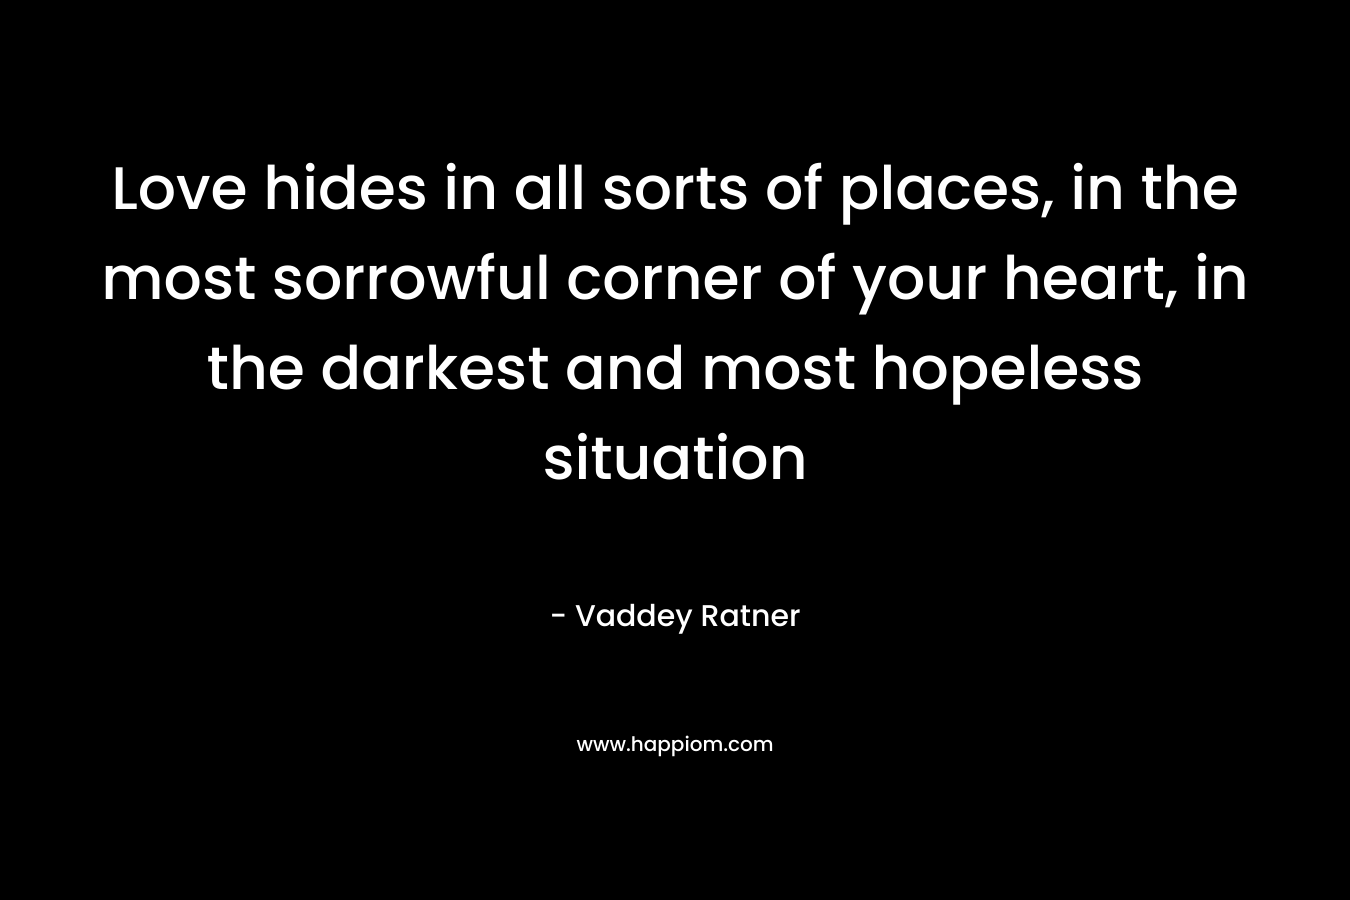 Love hides in all sorts of places, in the most sorrowful corner of your heart, in the darkest and most hopeless situation – Vaddey Ratner